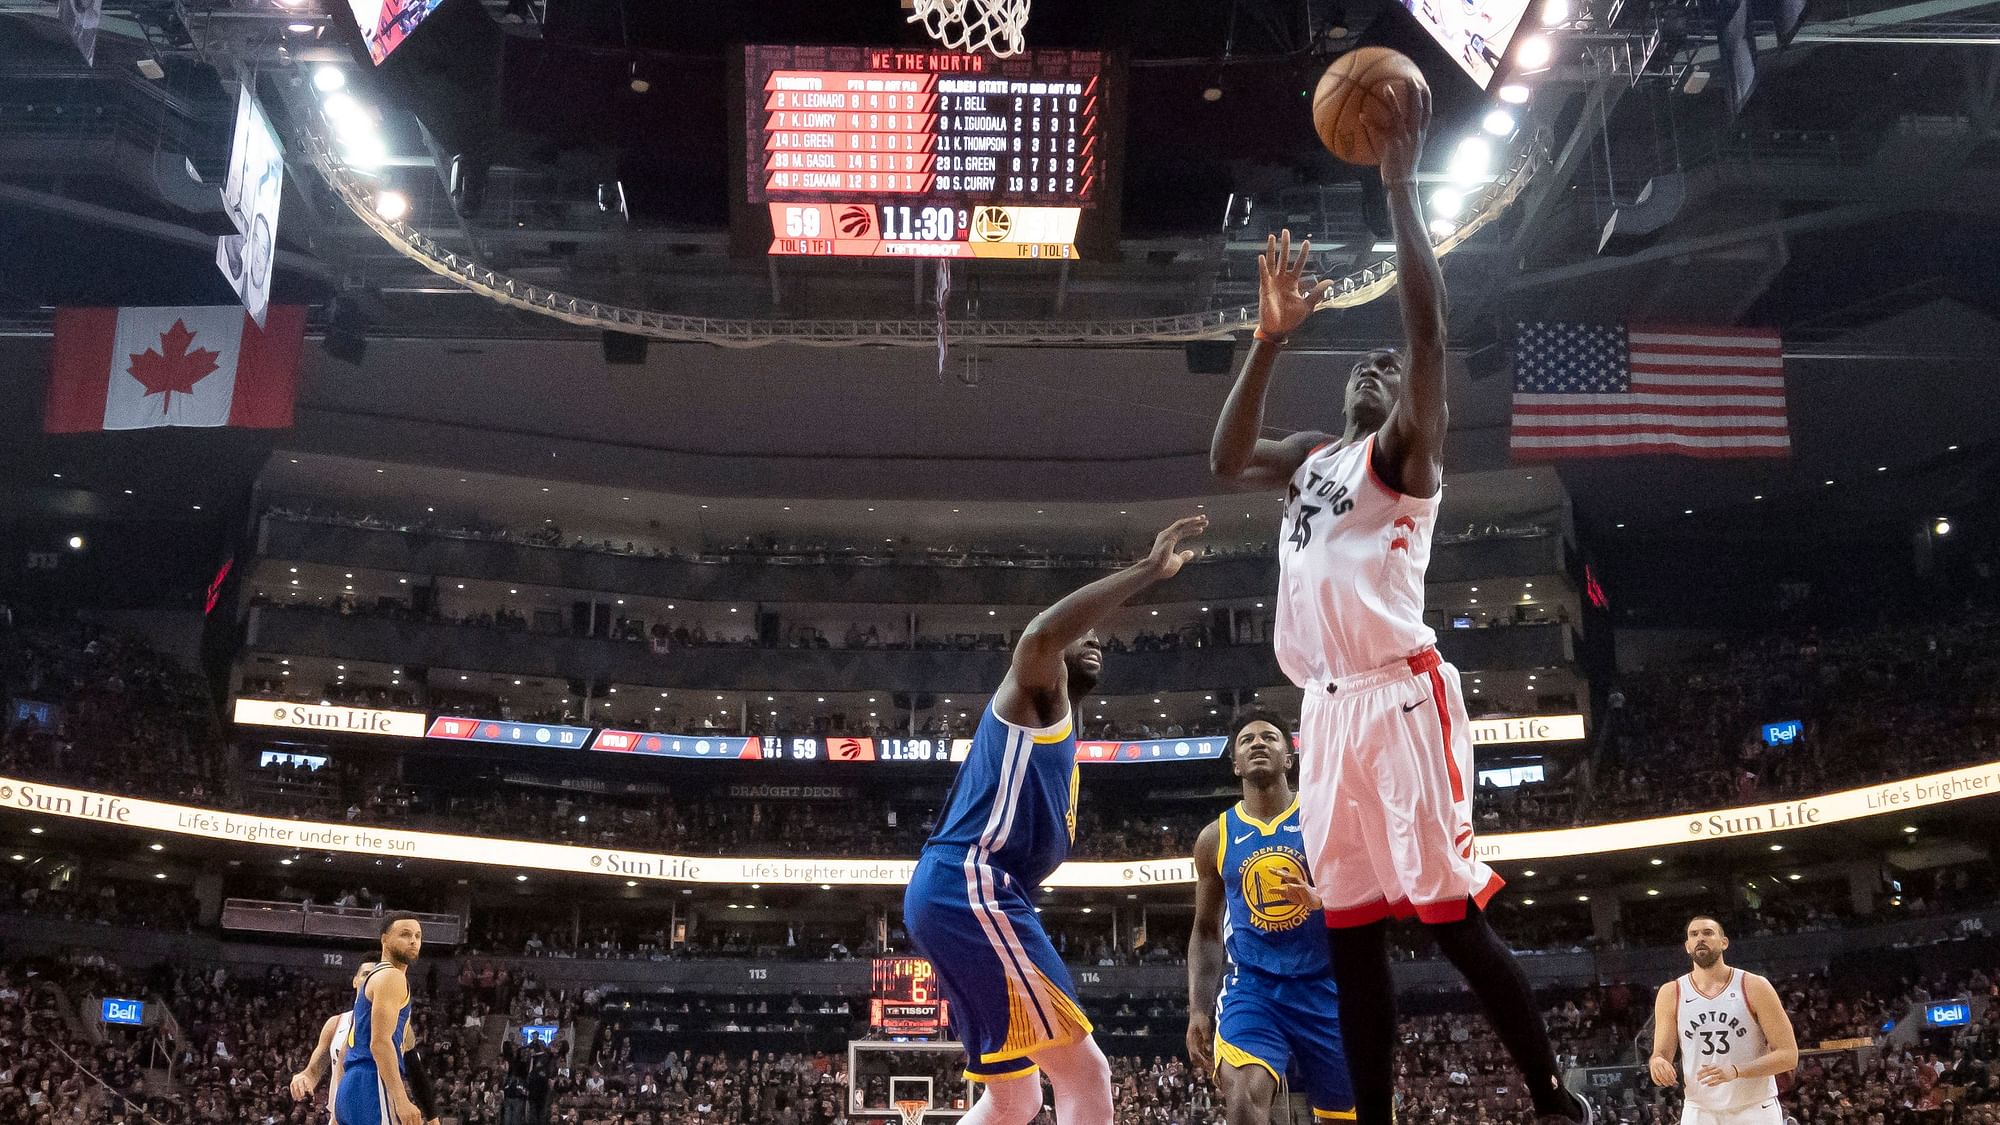 Toronto Raptors Pascal Siakam drives to the hoop against the Golden State Warriors during game 1 of the NBA Finals in Toronto on Thursday May 30, 2019.